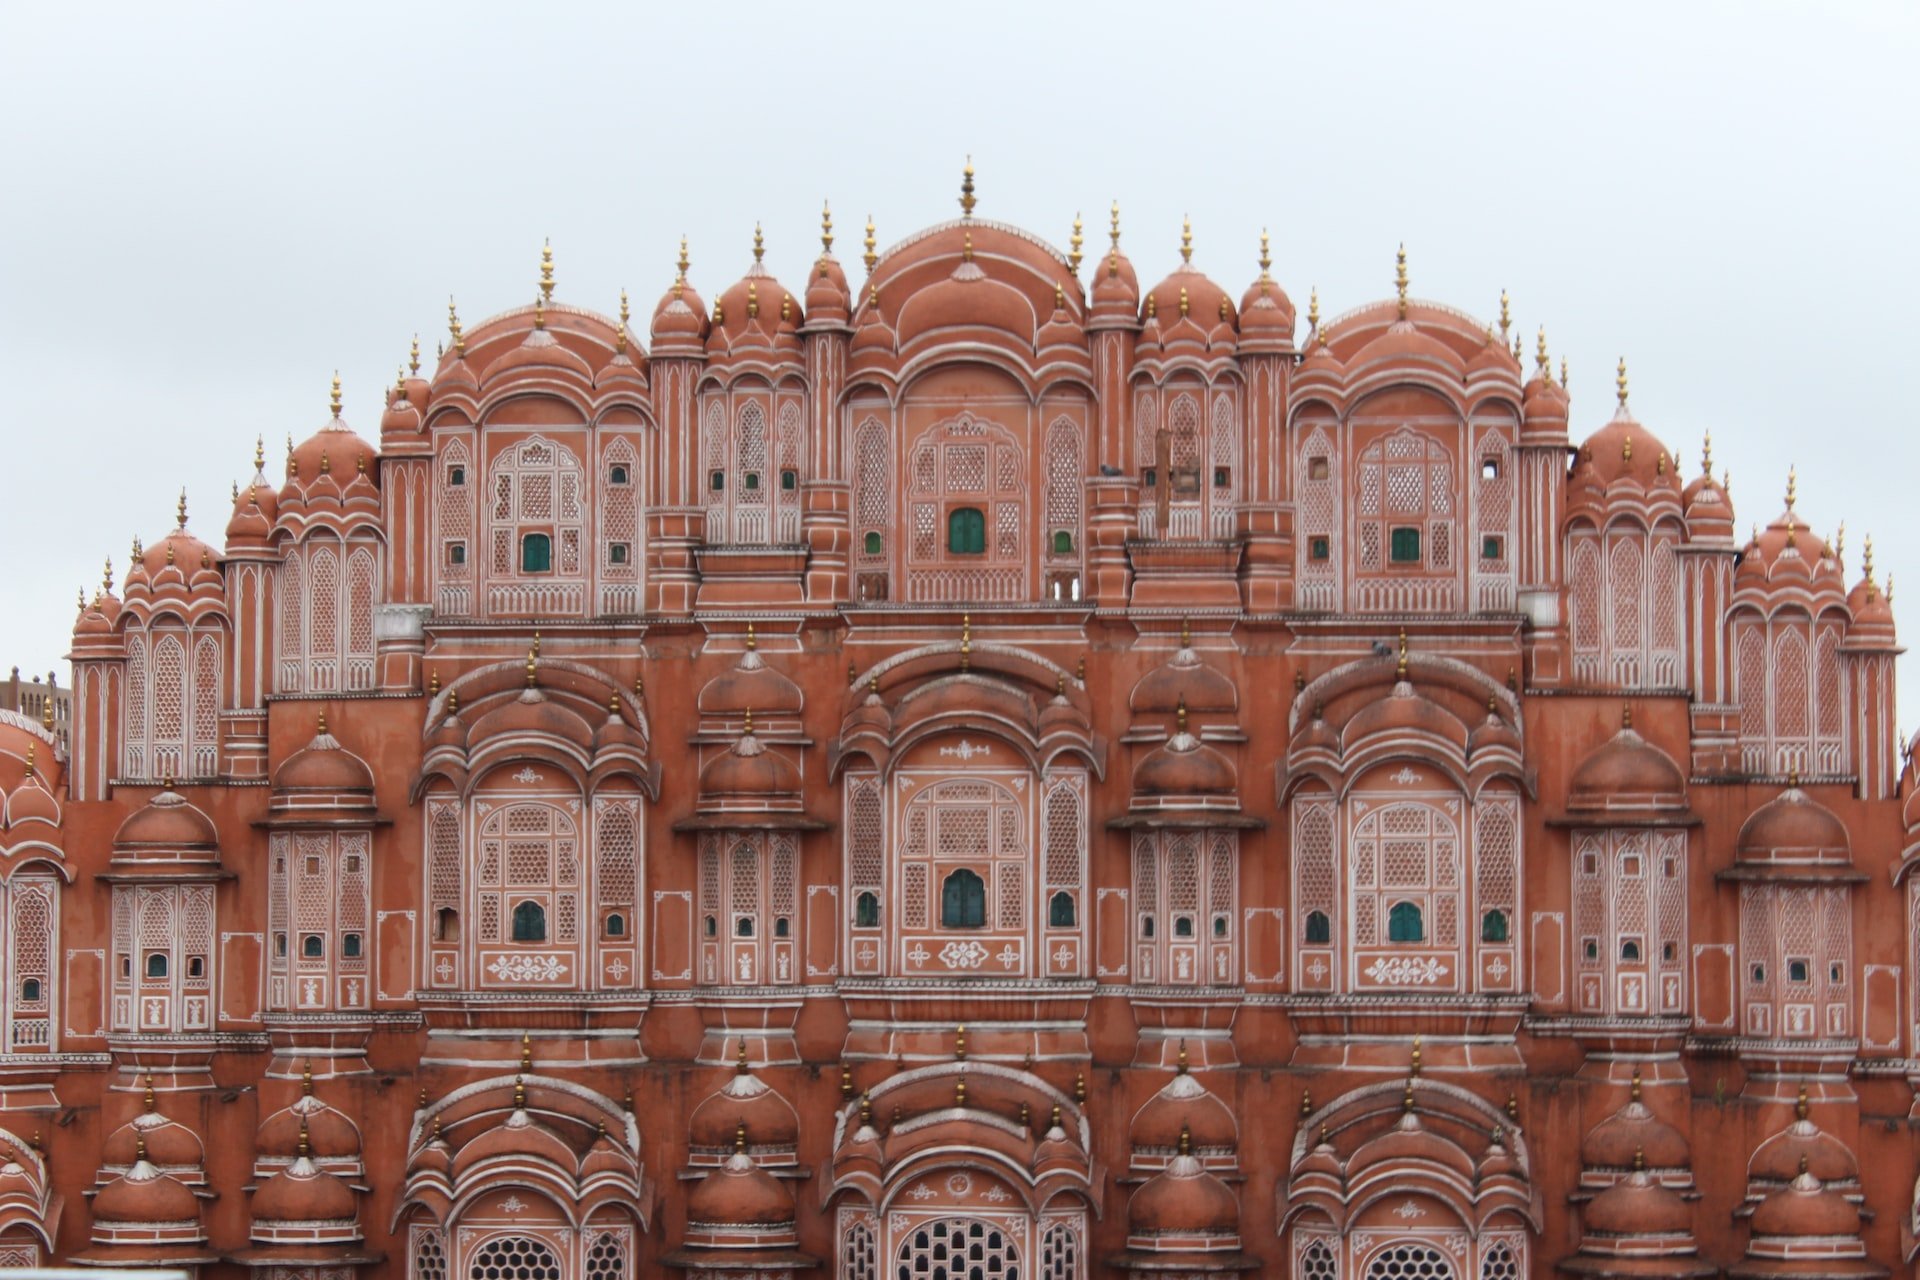 An image of a grand building in a pink hue, found in the city of Jaipur, also known as the 'Pink City'.